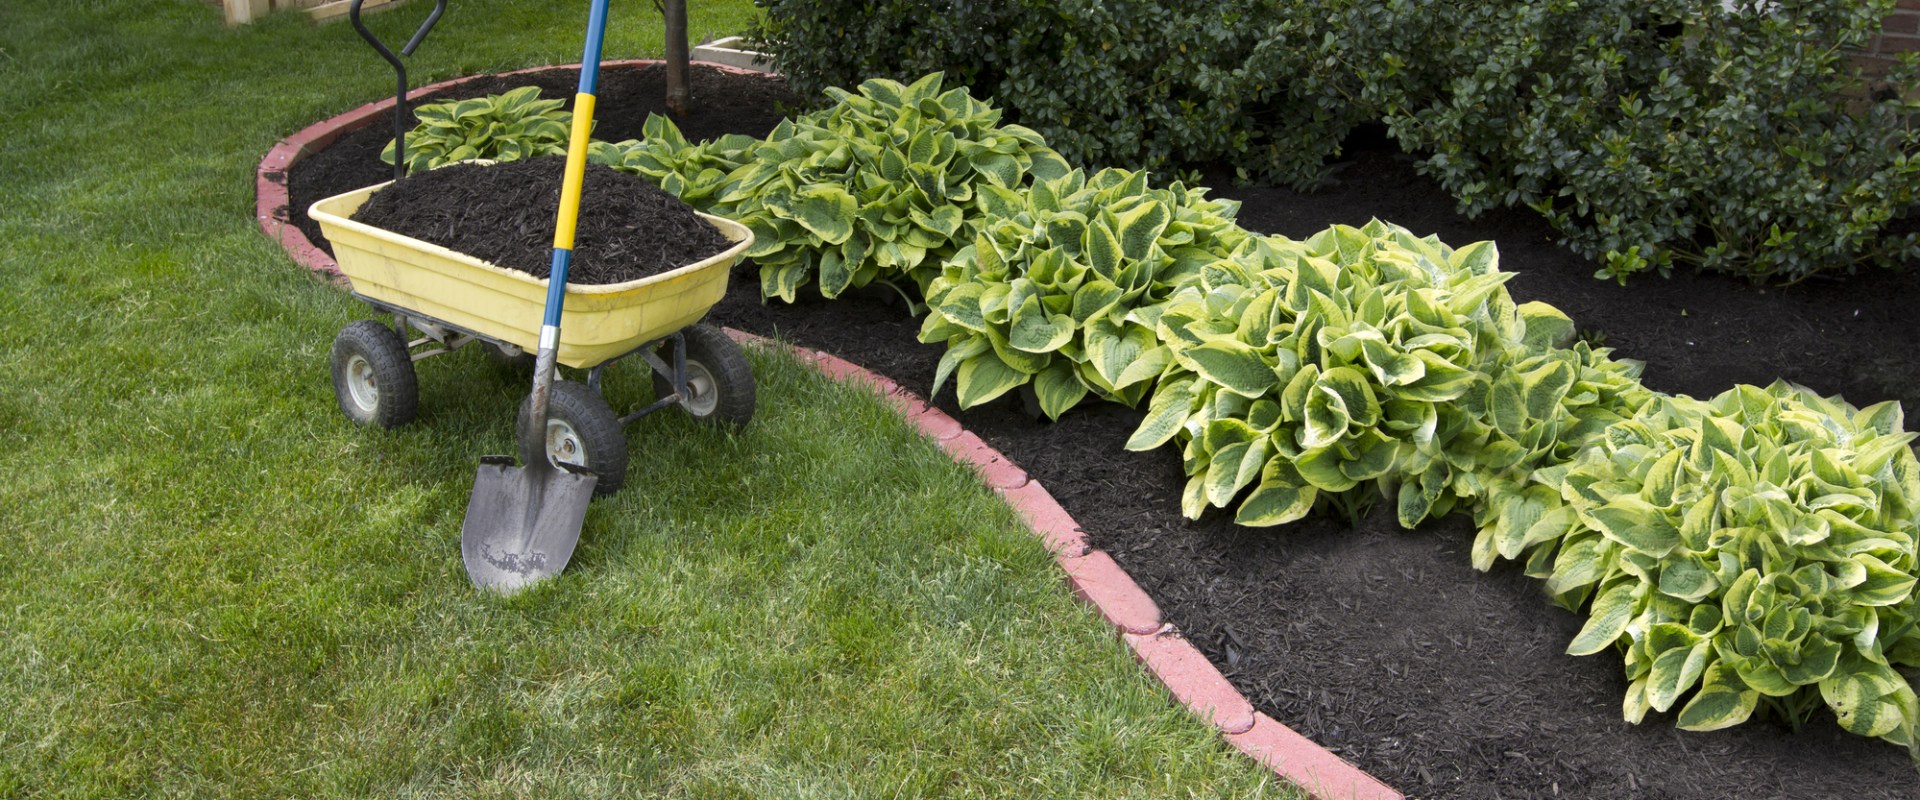 What Types of Mulch Should I Use for My Residential Landscaping Project?